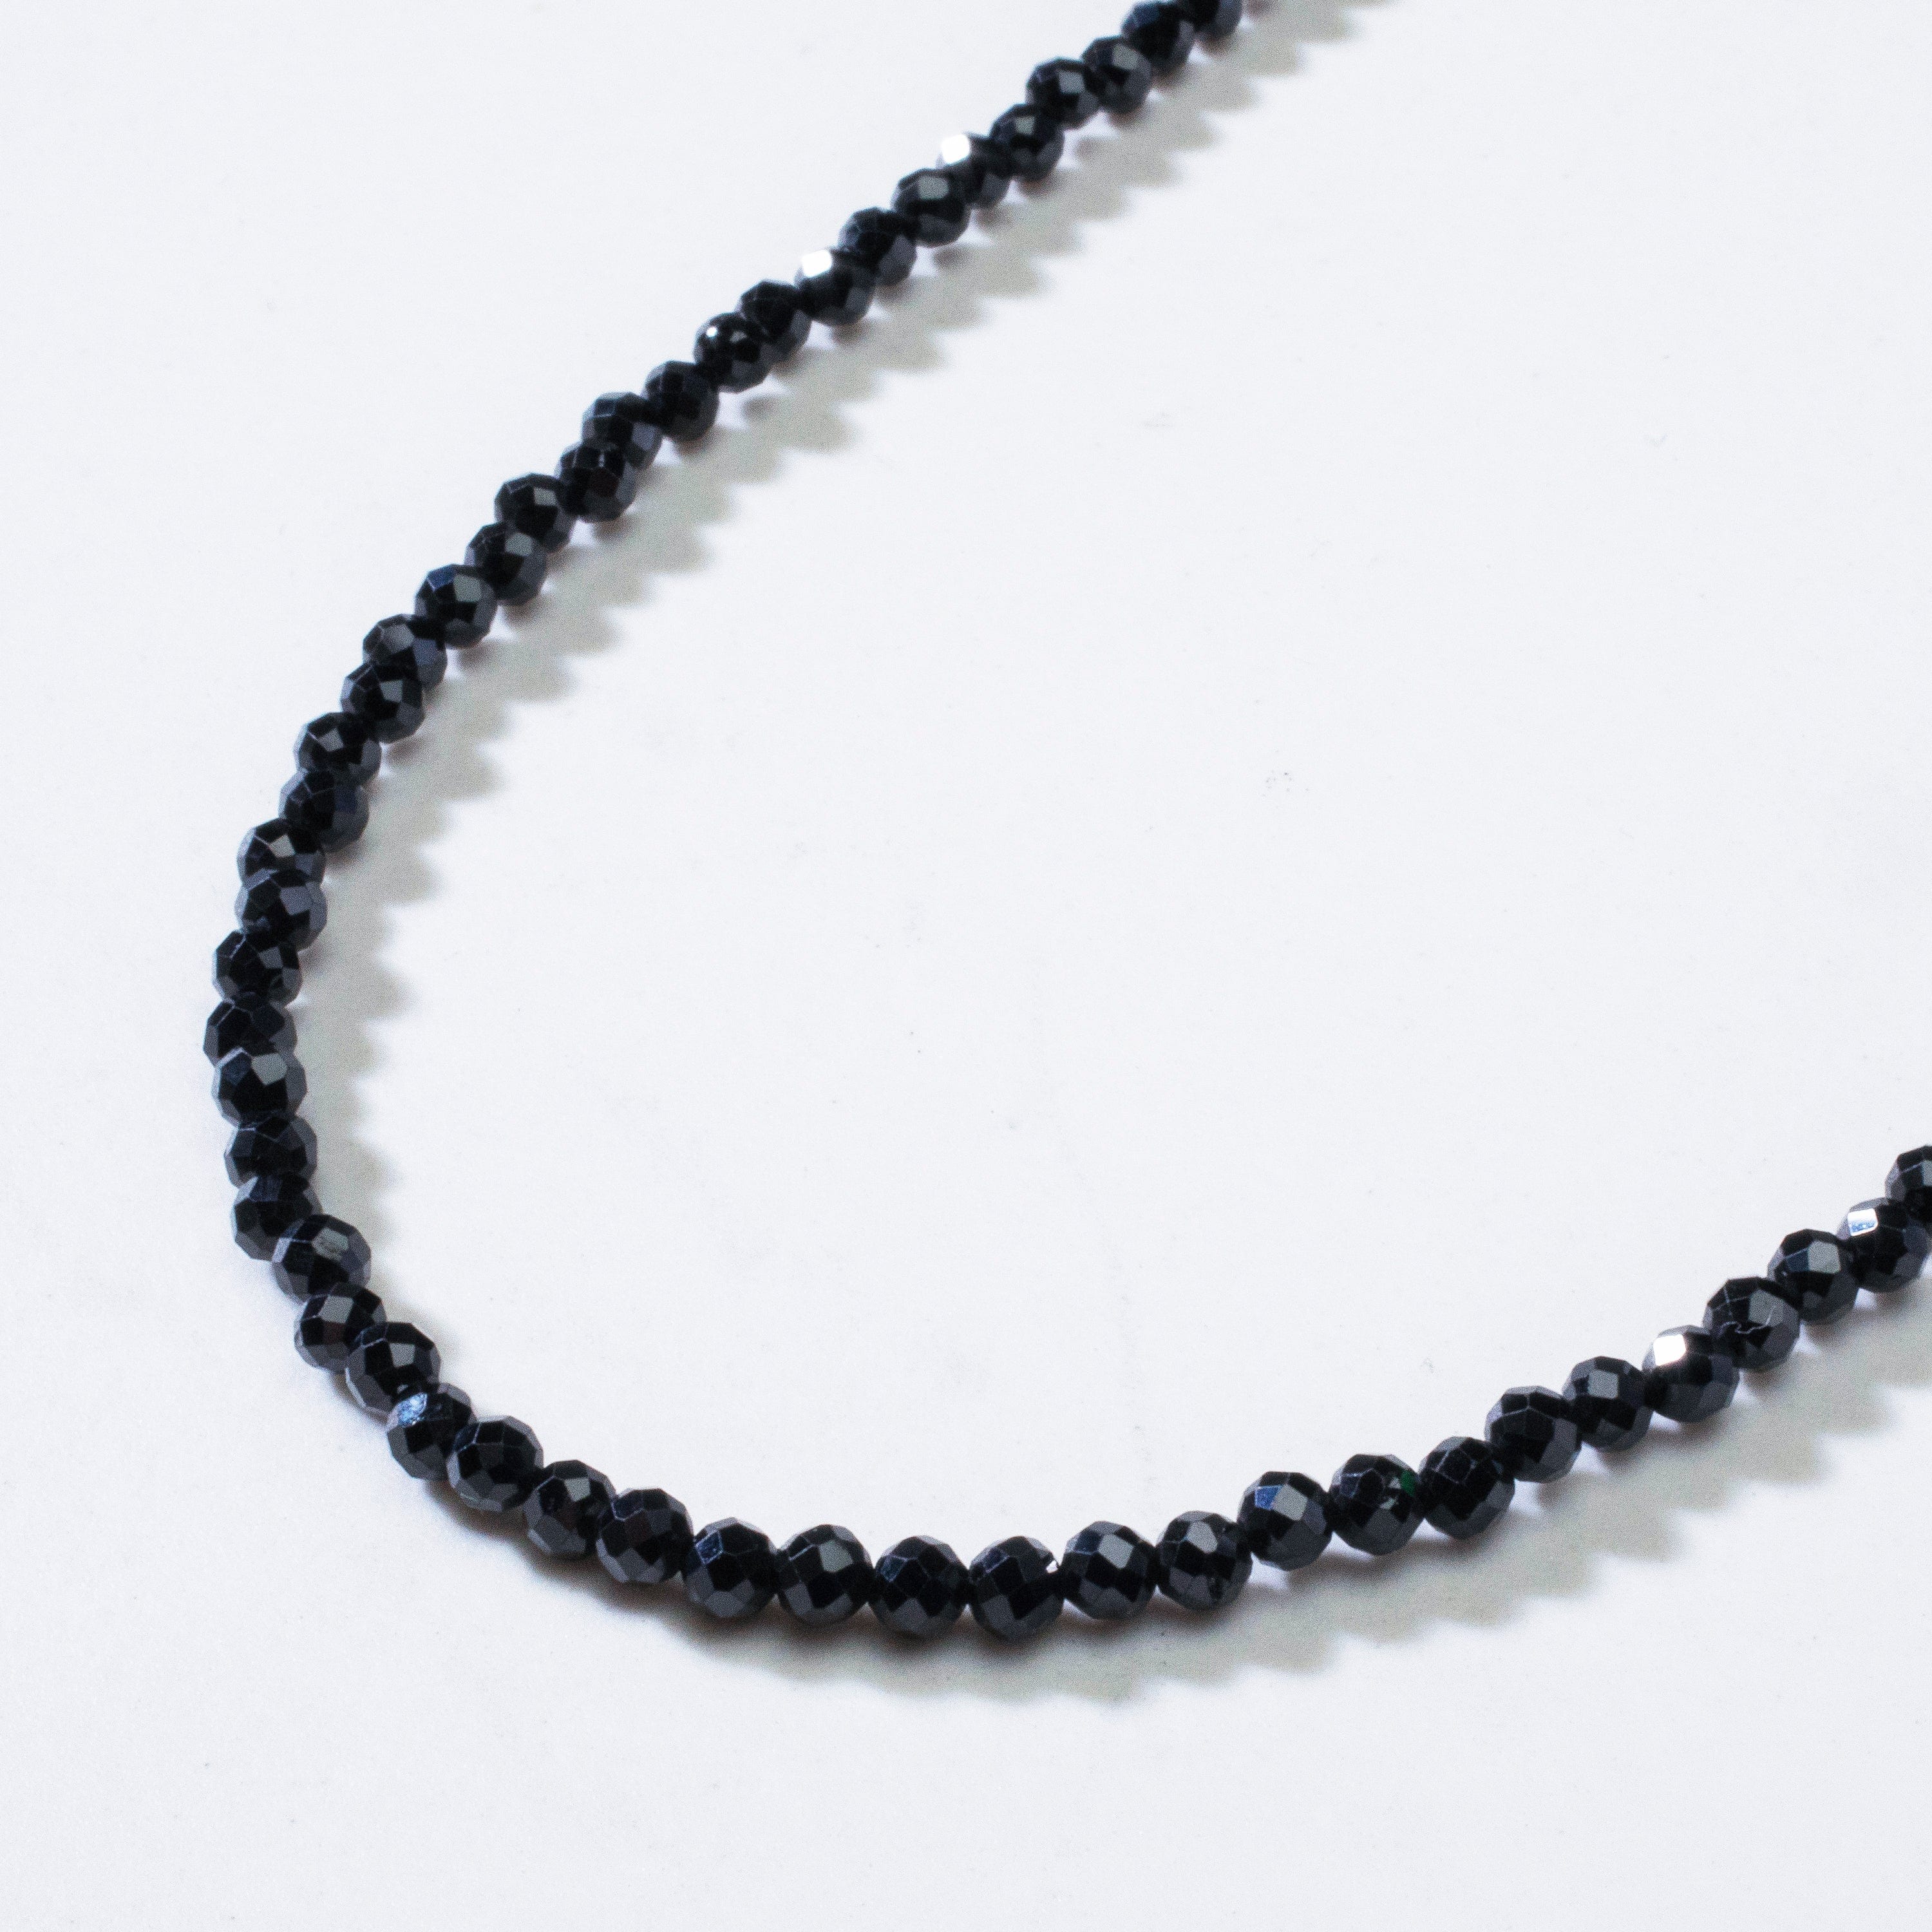 KALIFANO Gemstone Jewelry 3mm Black Spinal Faceted 31" Necklace / Multi Wrap Bracelet N3-79S-BS